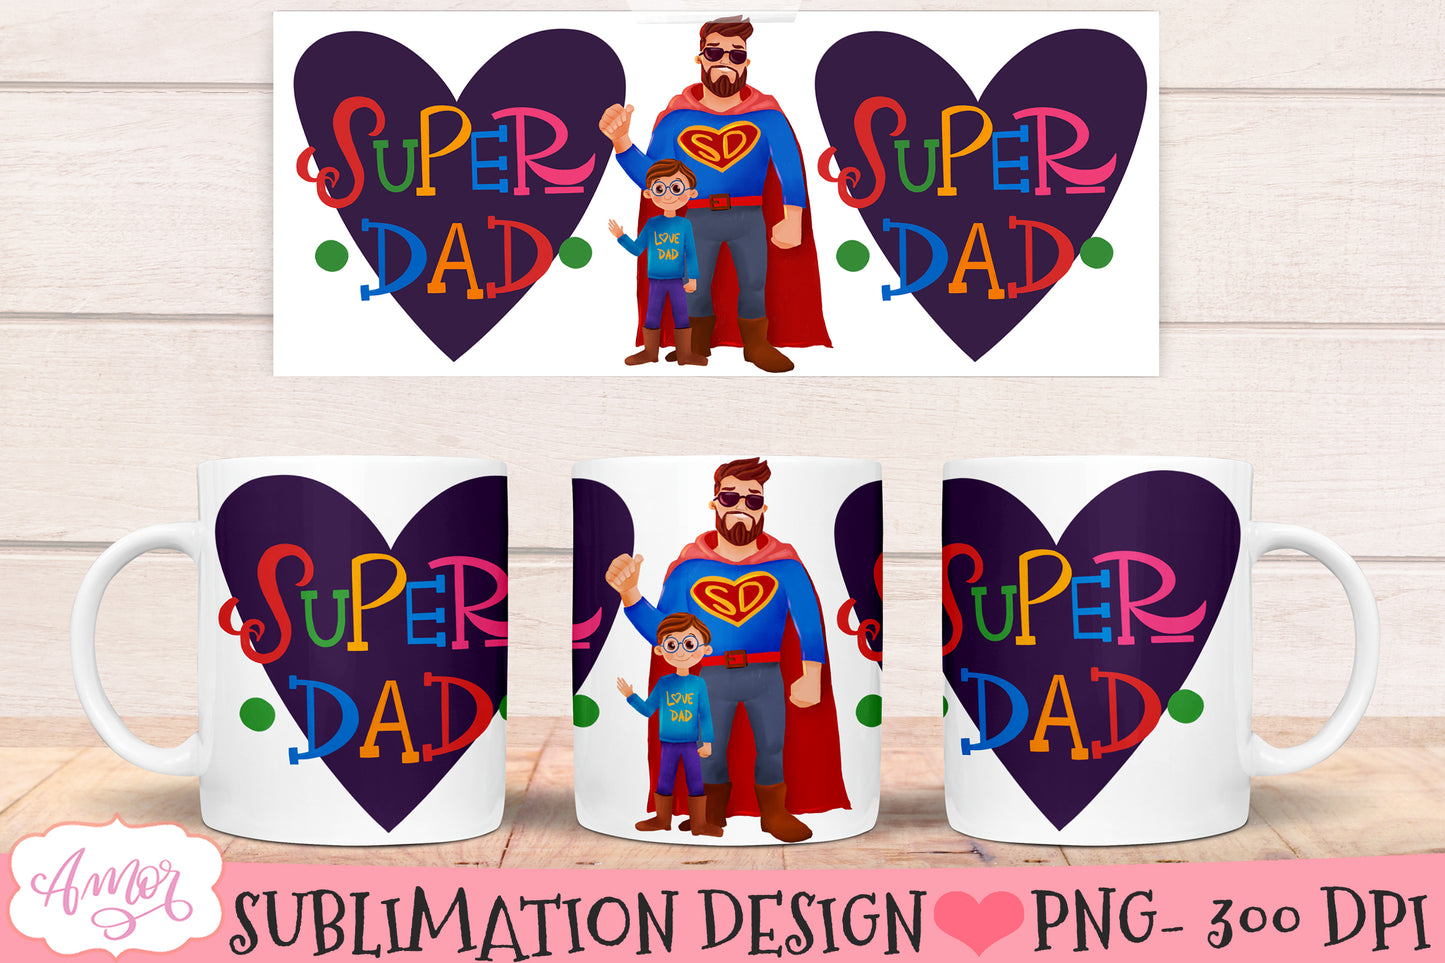 Super Dad and Son mug wrap for sublimation | Father's day